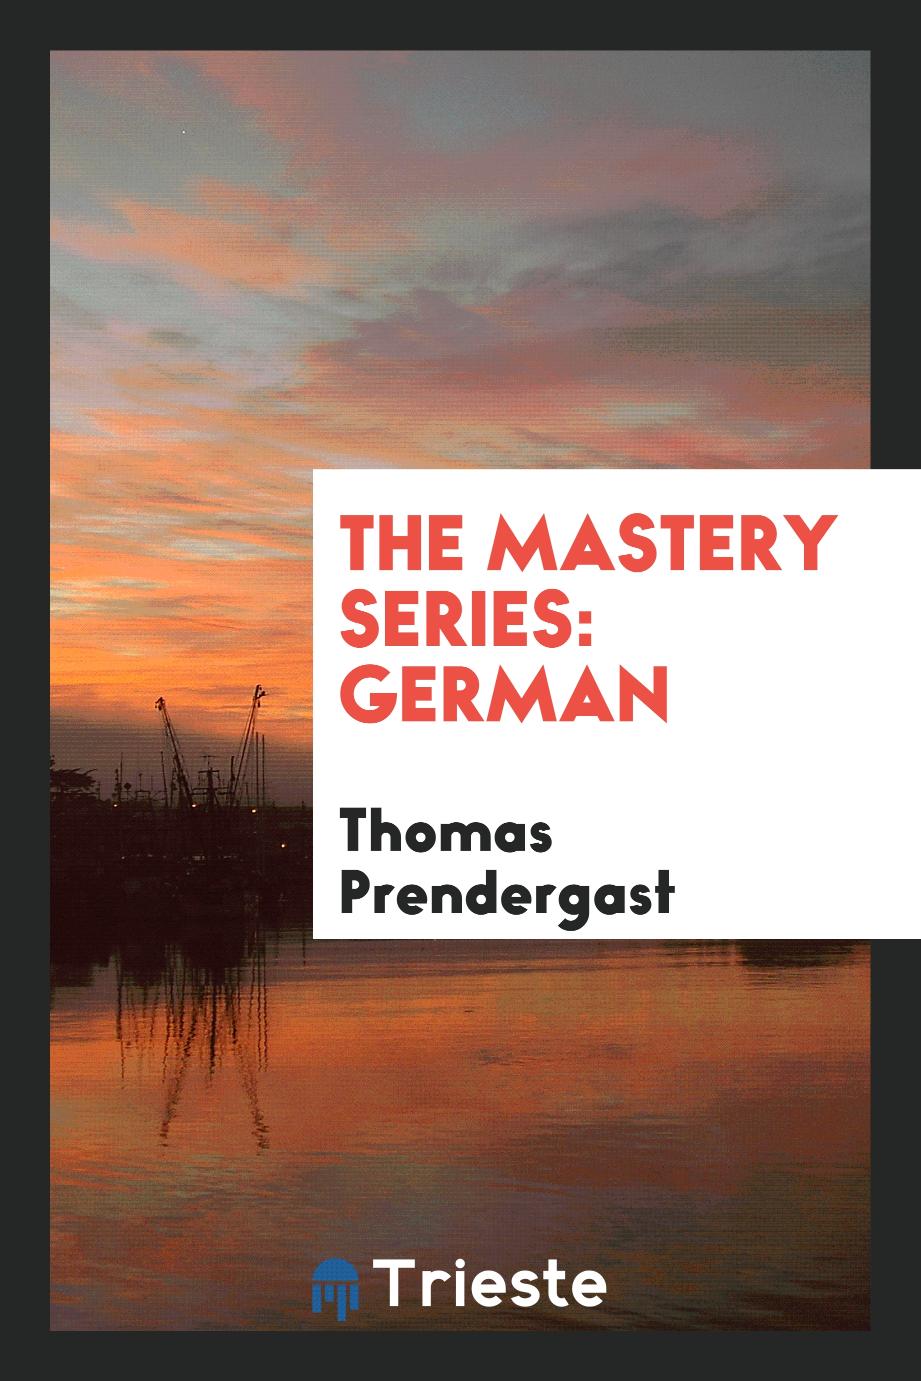 The Mastery Series: German